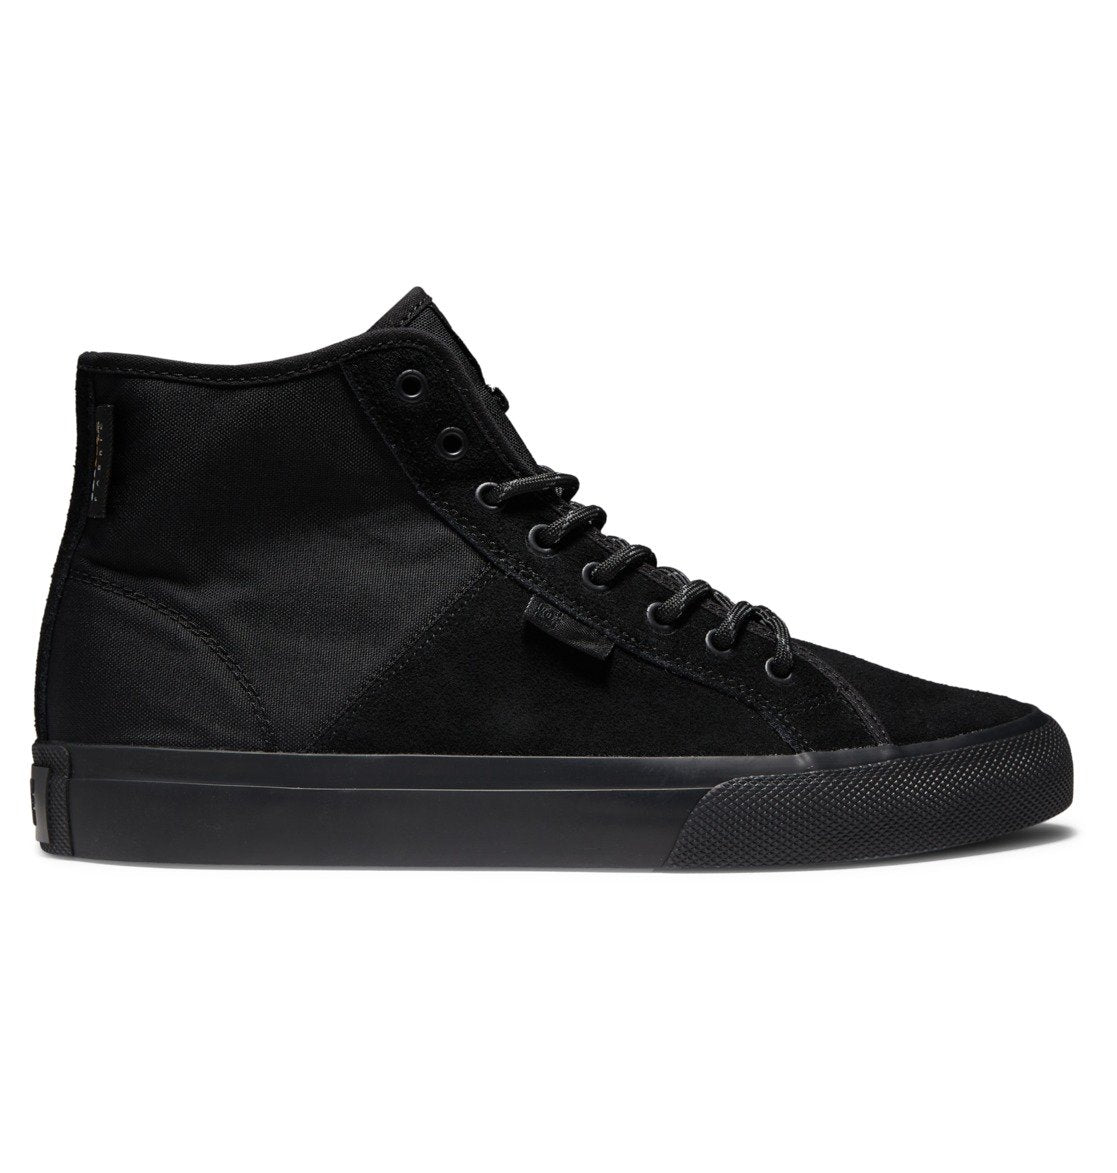 MANUAL HIGH-TOP WINTER SHOES